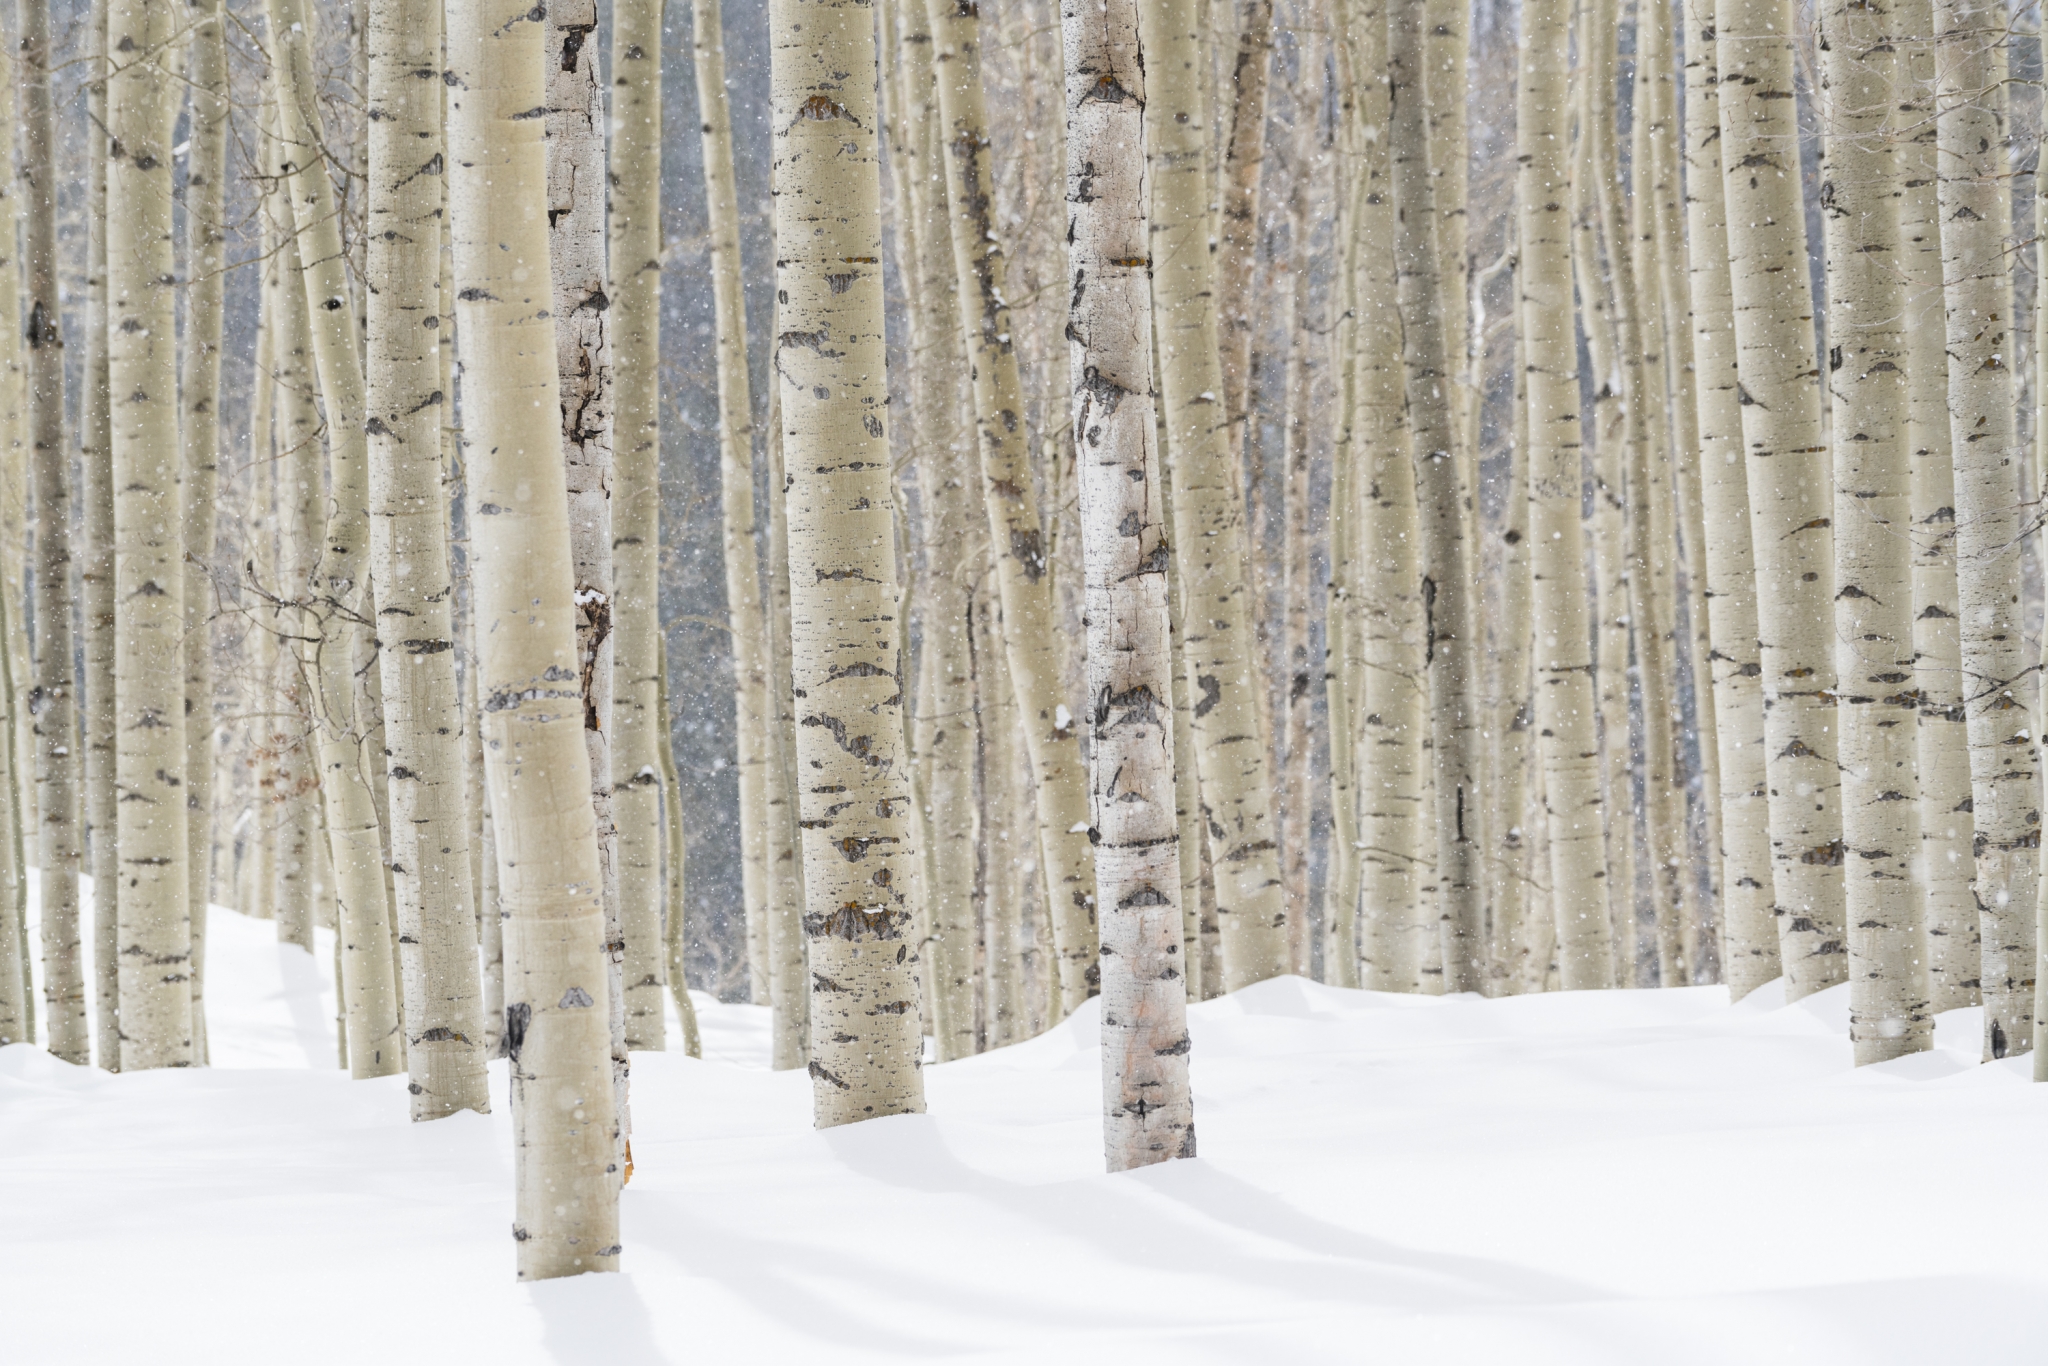 A forest of birch trees in the white snow